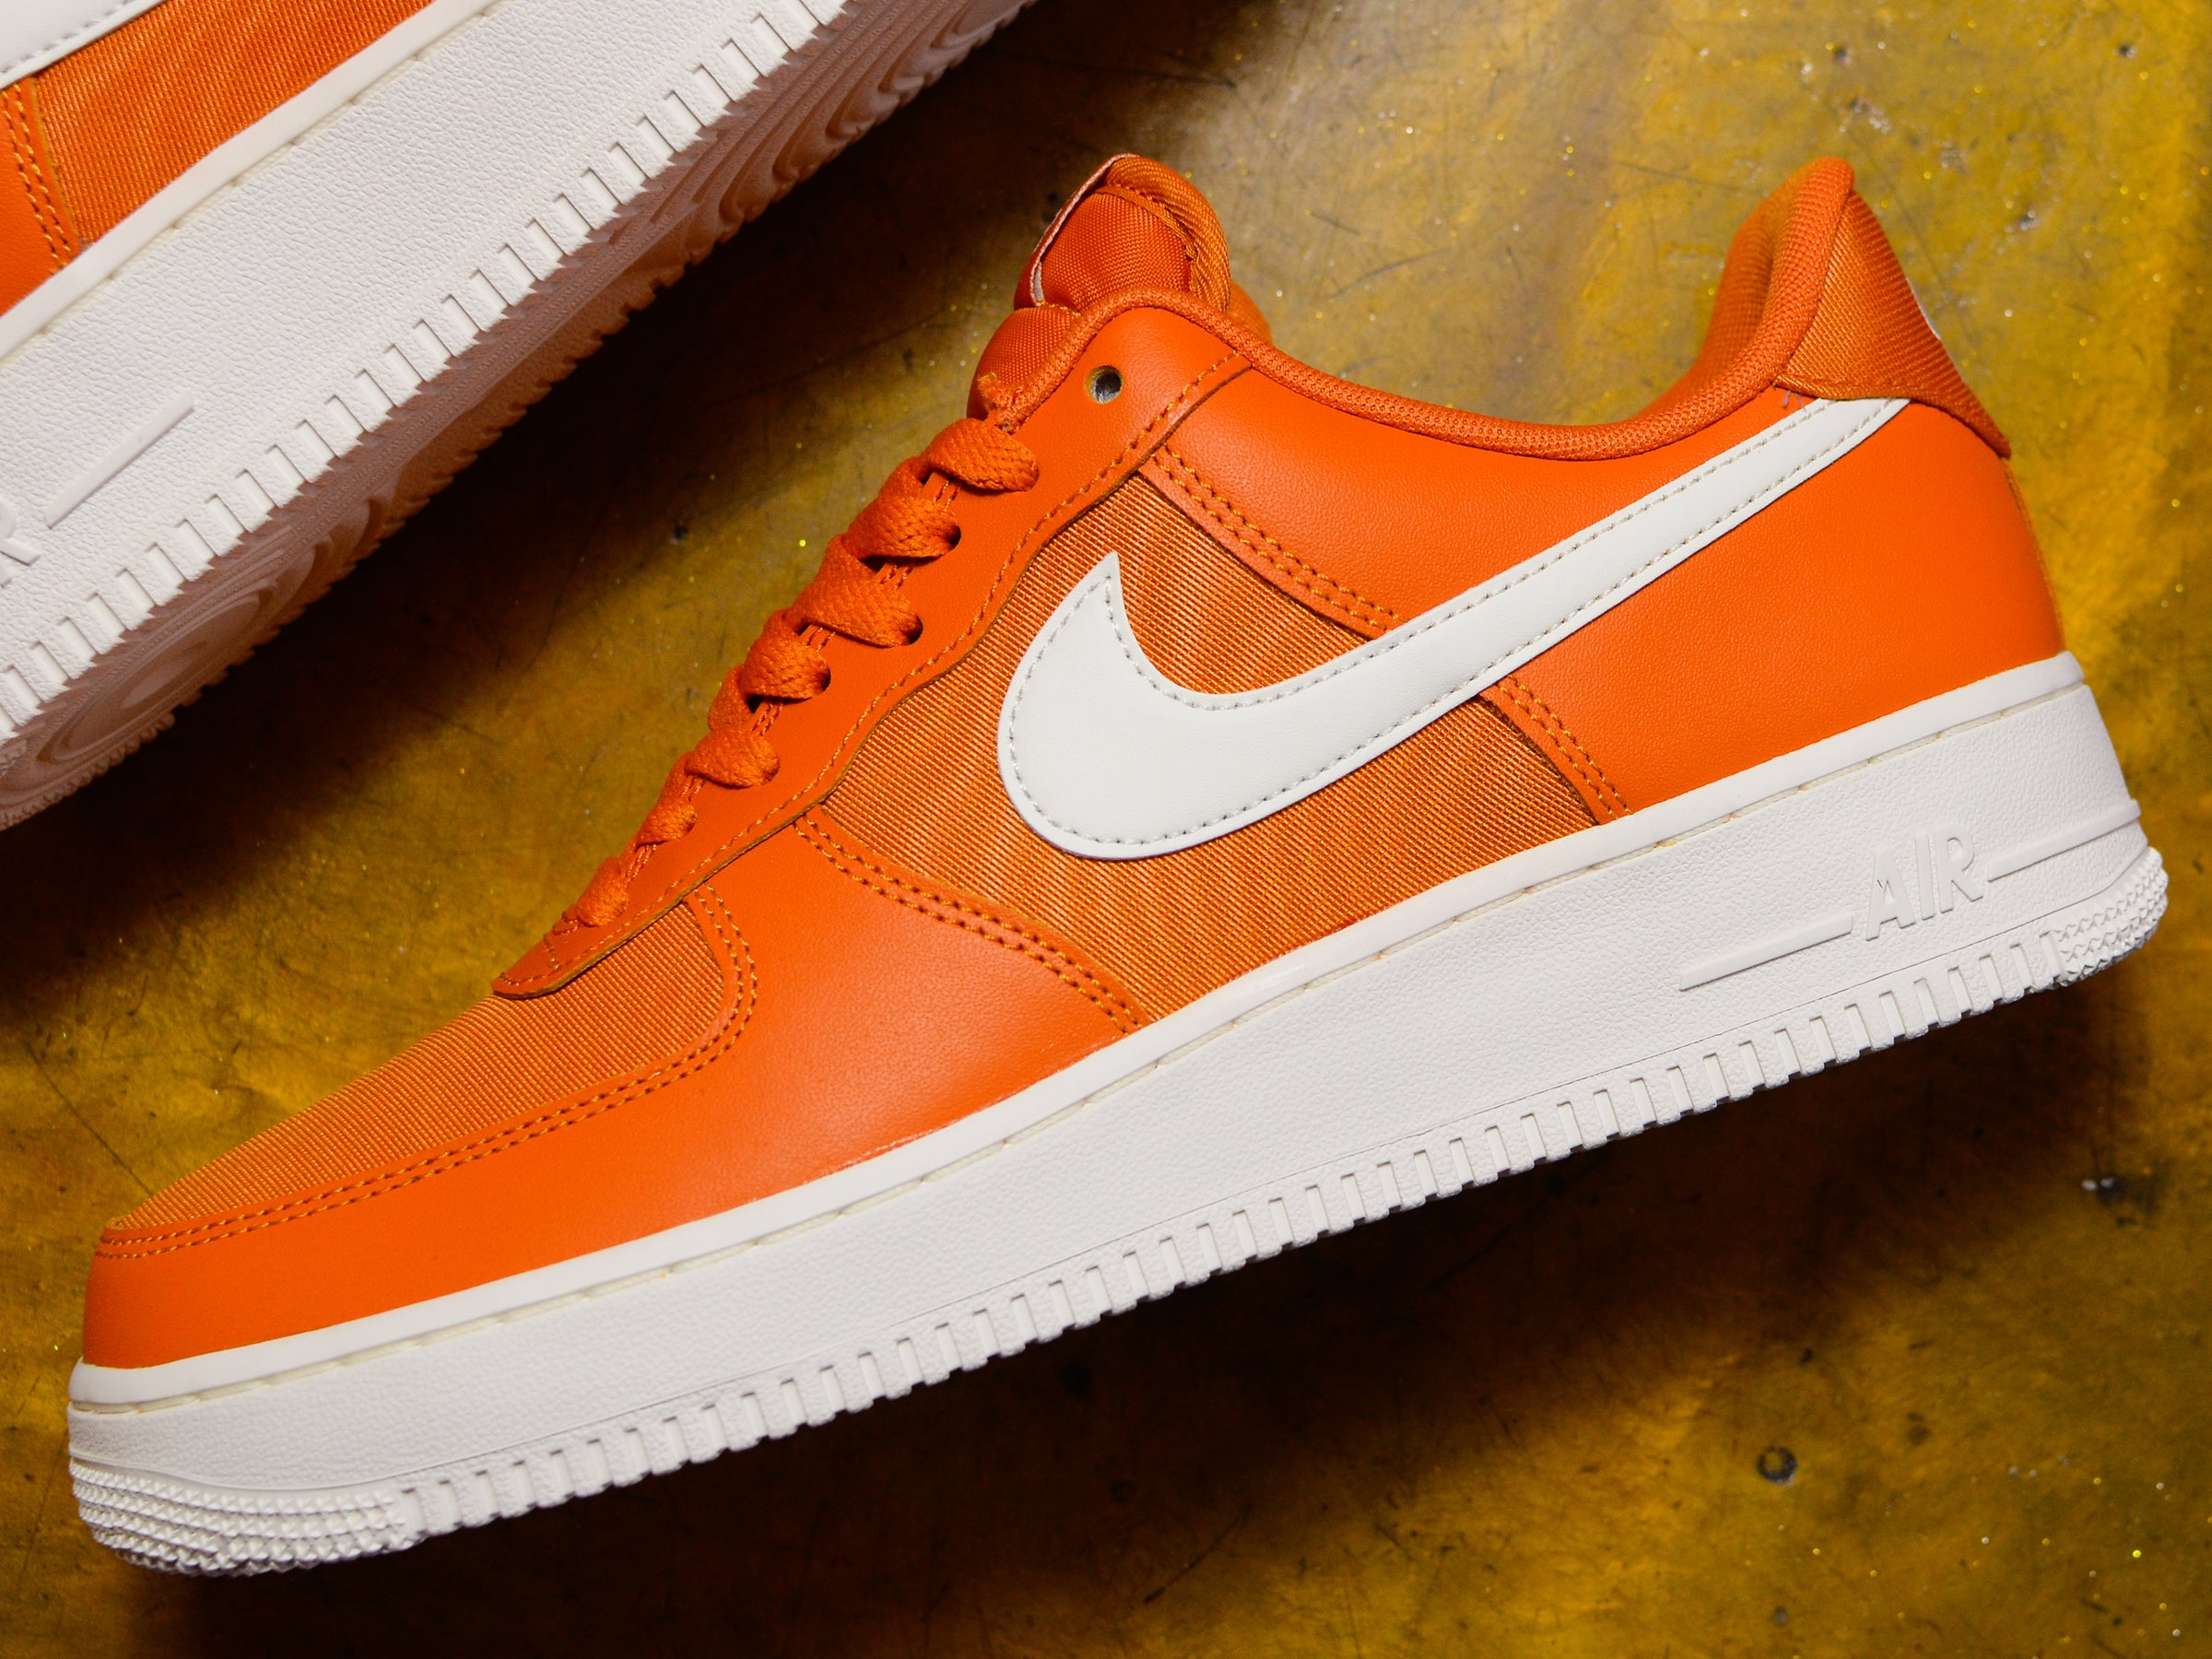 NIKE AIR FORCE 1 LV8 2 (GS) 'MONARCH/SAIL' ₹7,495 UK 3-6 🧡 There's a lot  to love about the AF1: Its tough stitching and grippy tread…